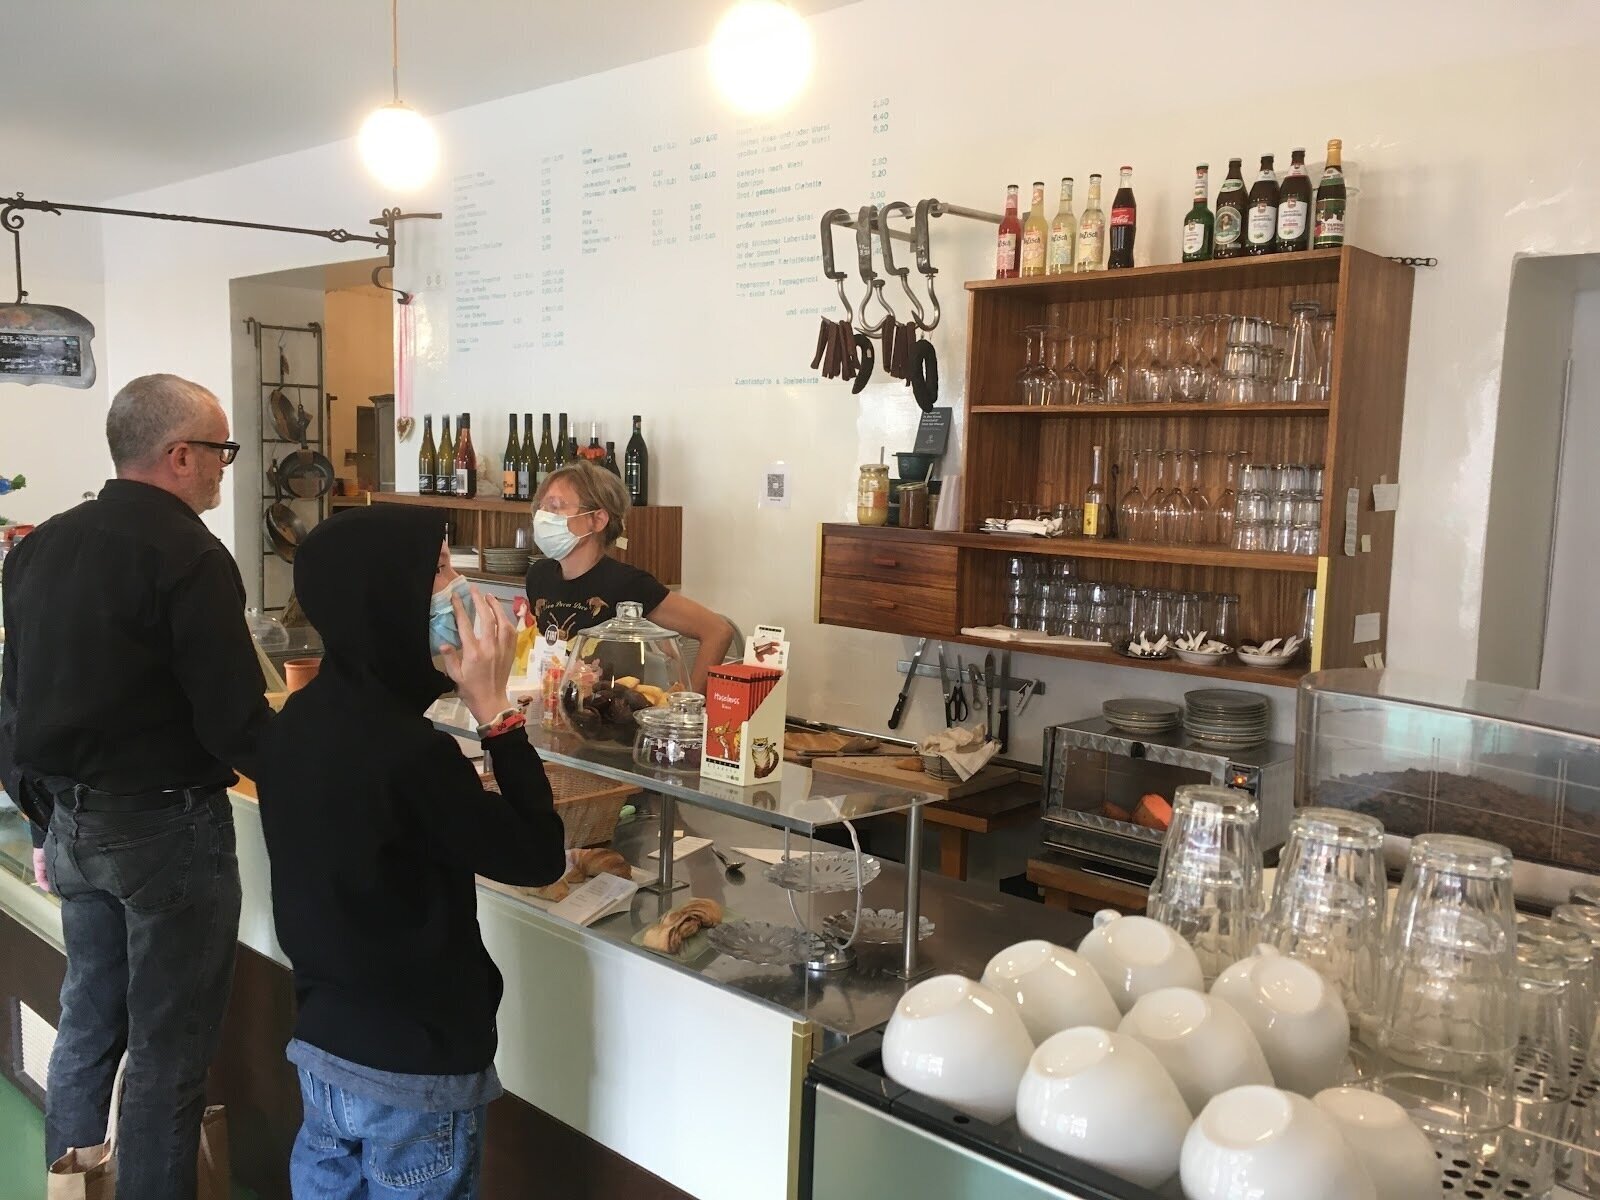 <span class="translation_missing" title="translation missing: en.meta.location_title, location_name: Cafe Sgaminegg, city: Berlin">Location Title</span>